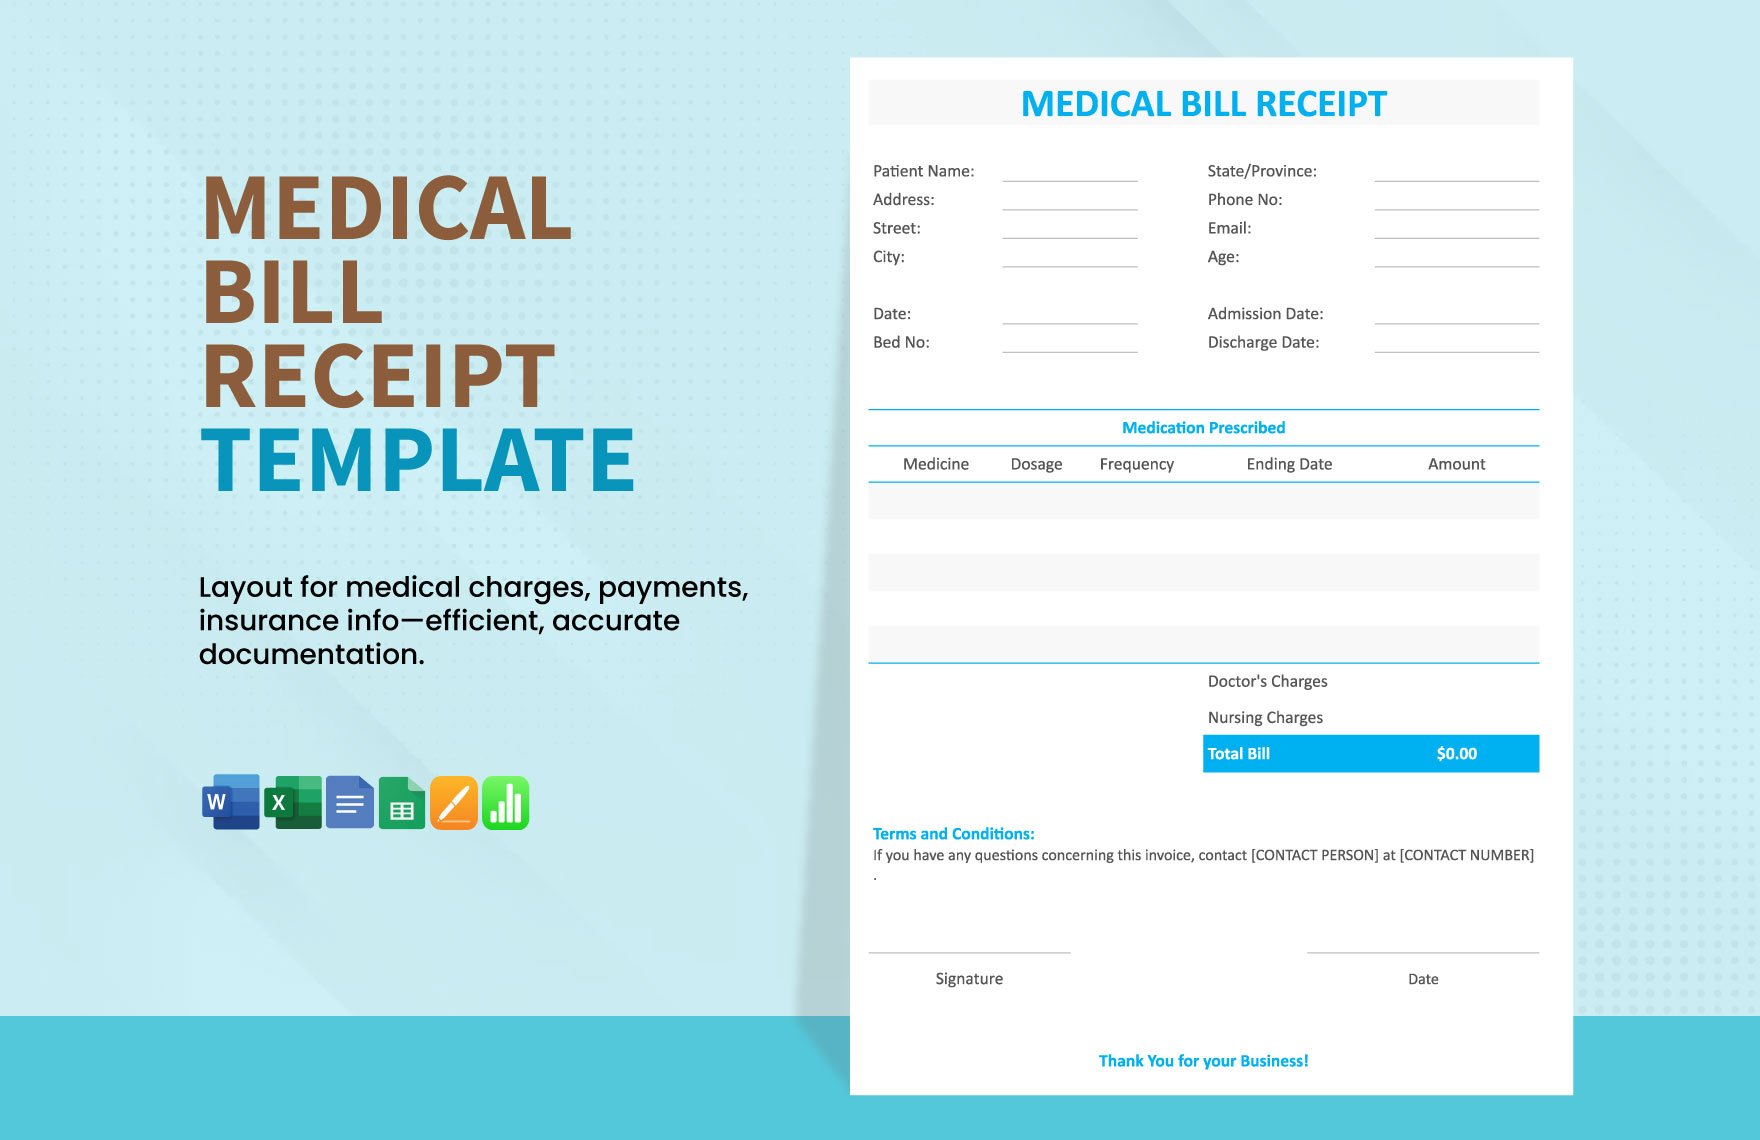 Medical Bill Receipt Template in Word, Google Docs, Excel, Google Sheets, Apple Pages, Apple Numbers